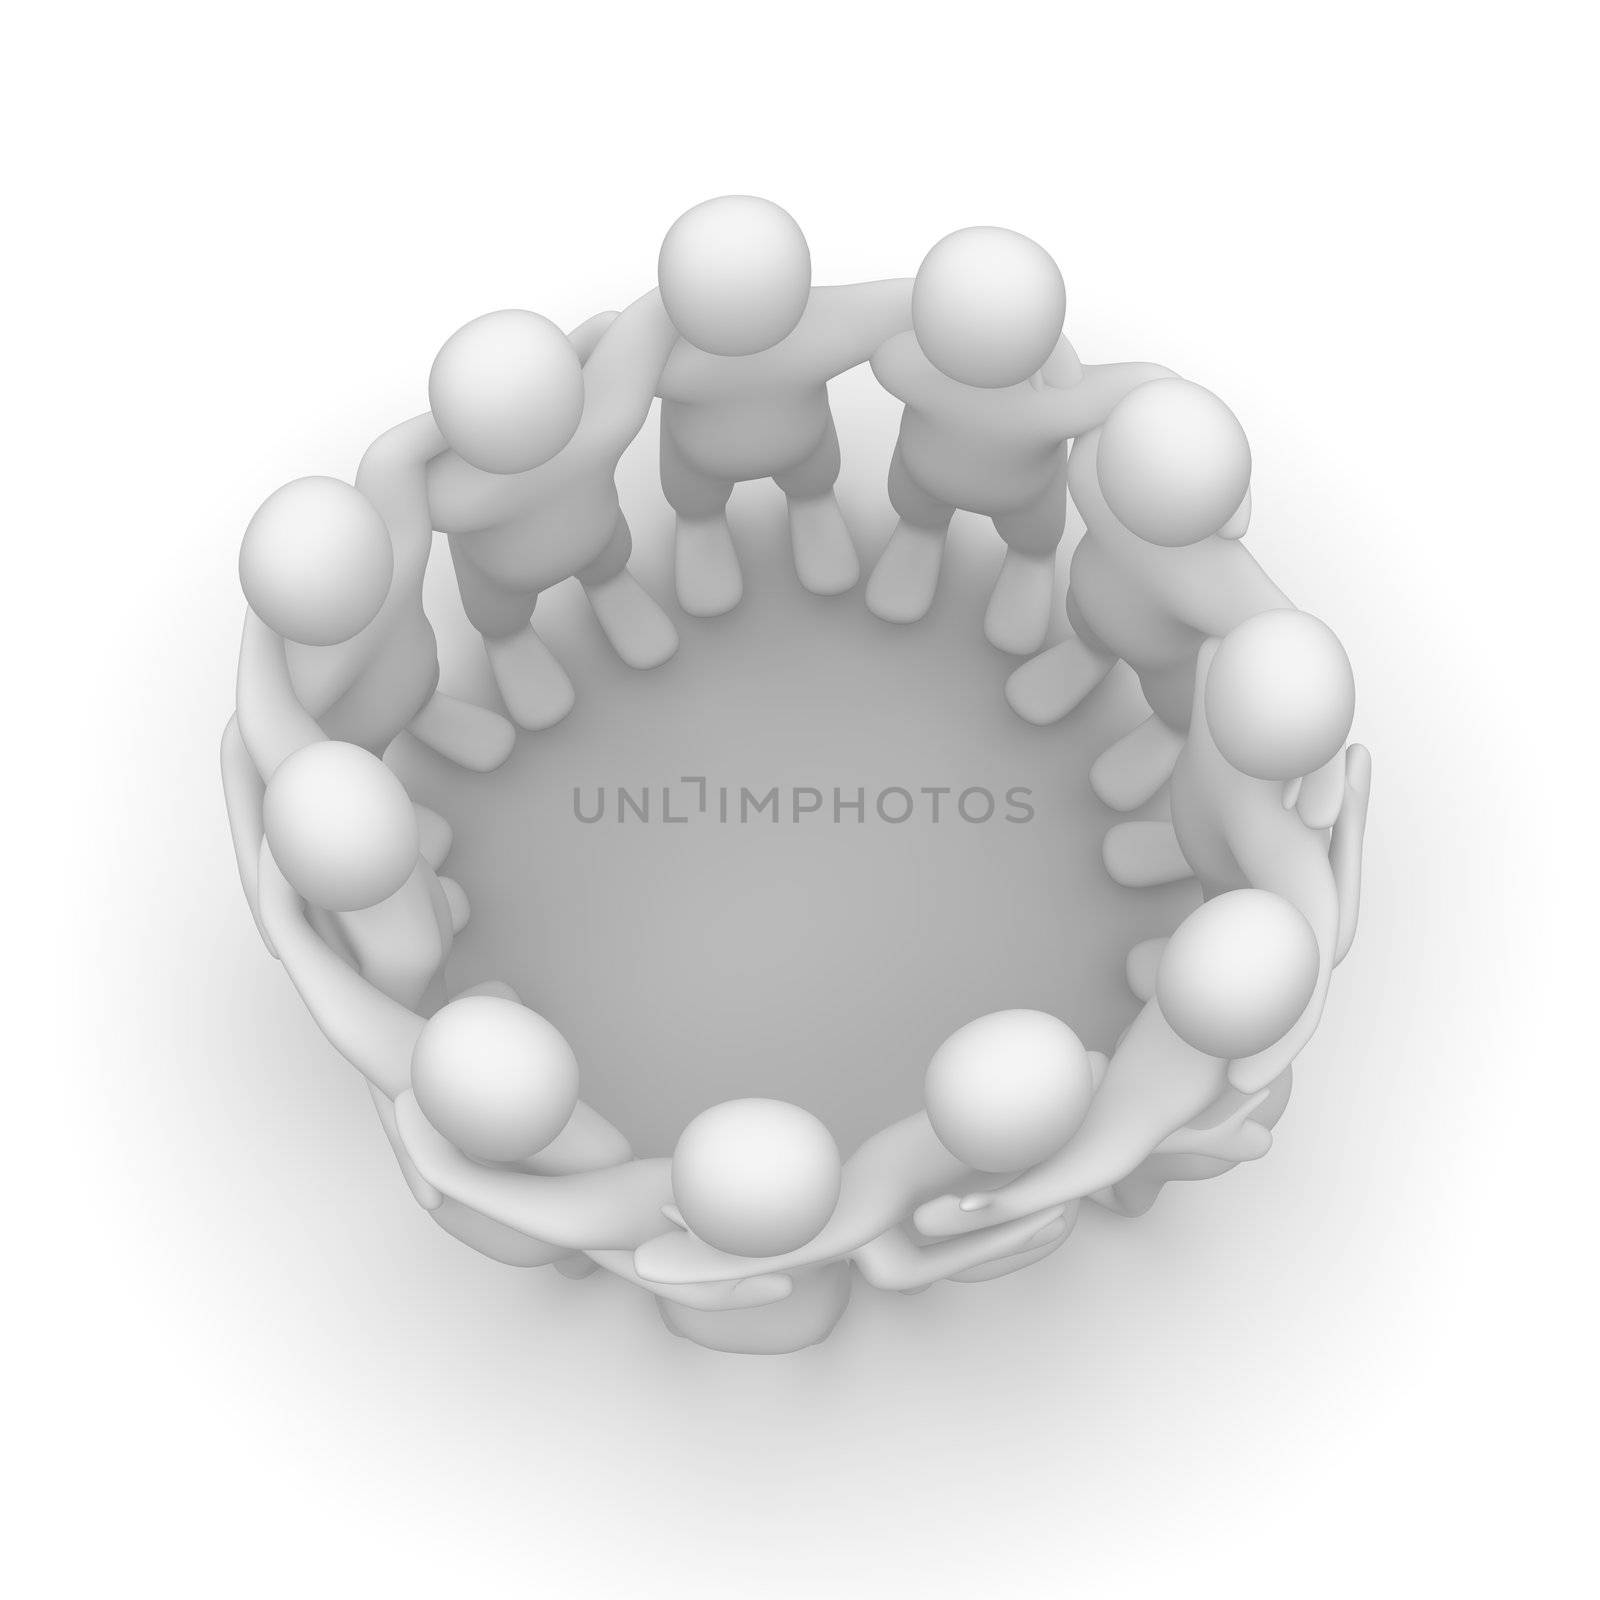 Friends meeting. 3d rendered illustration isolated on white.